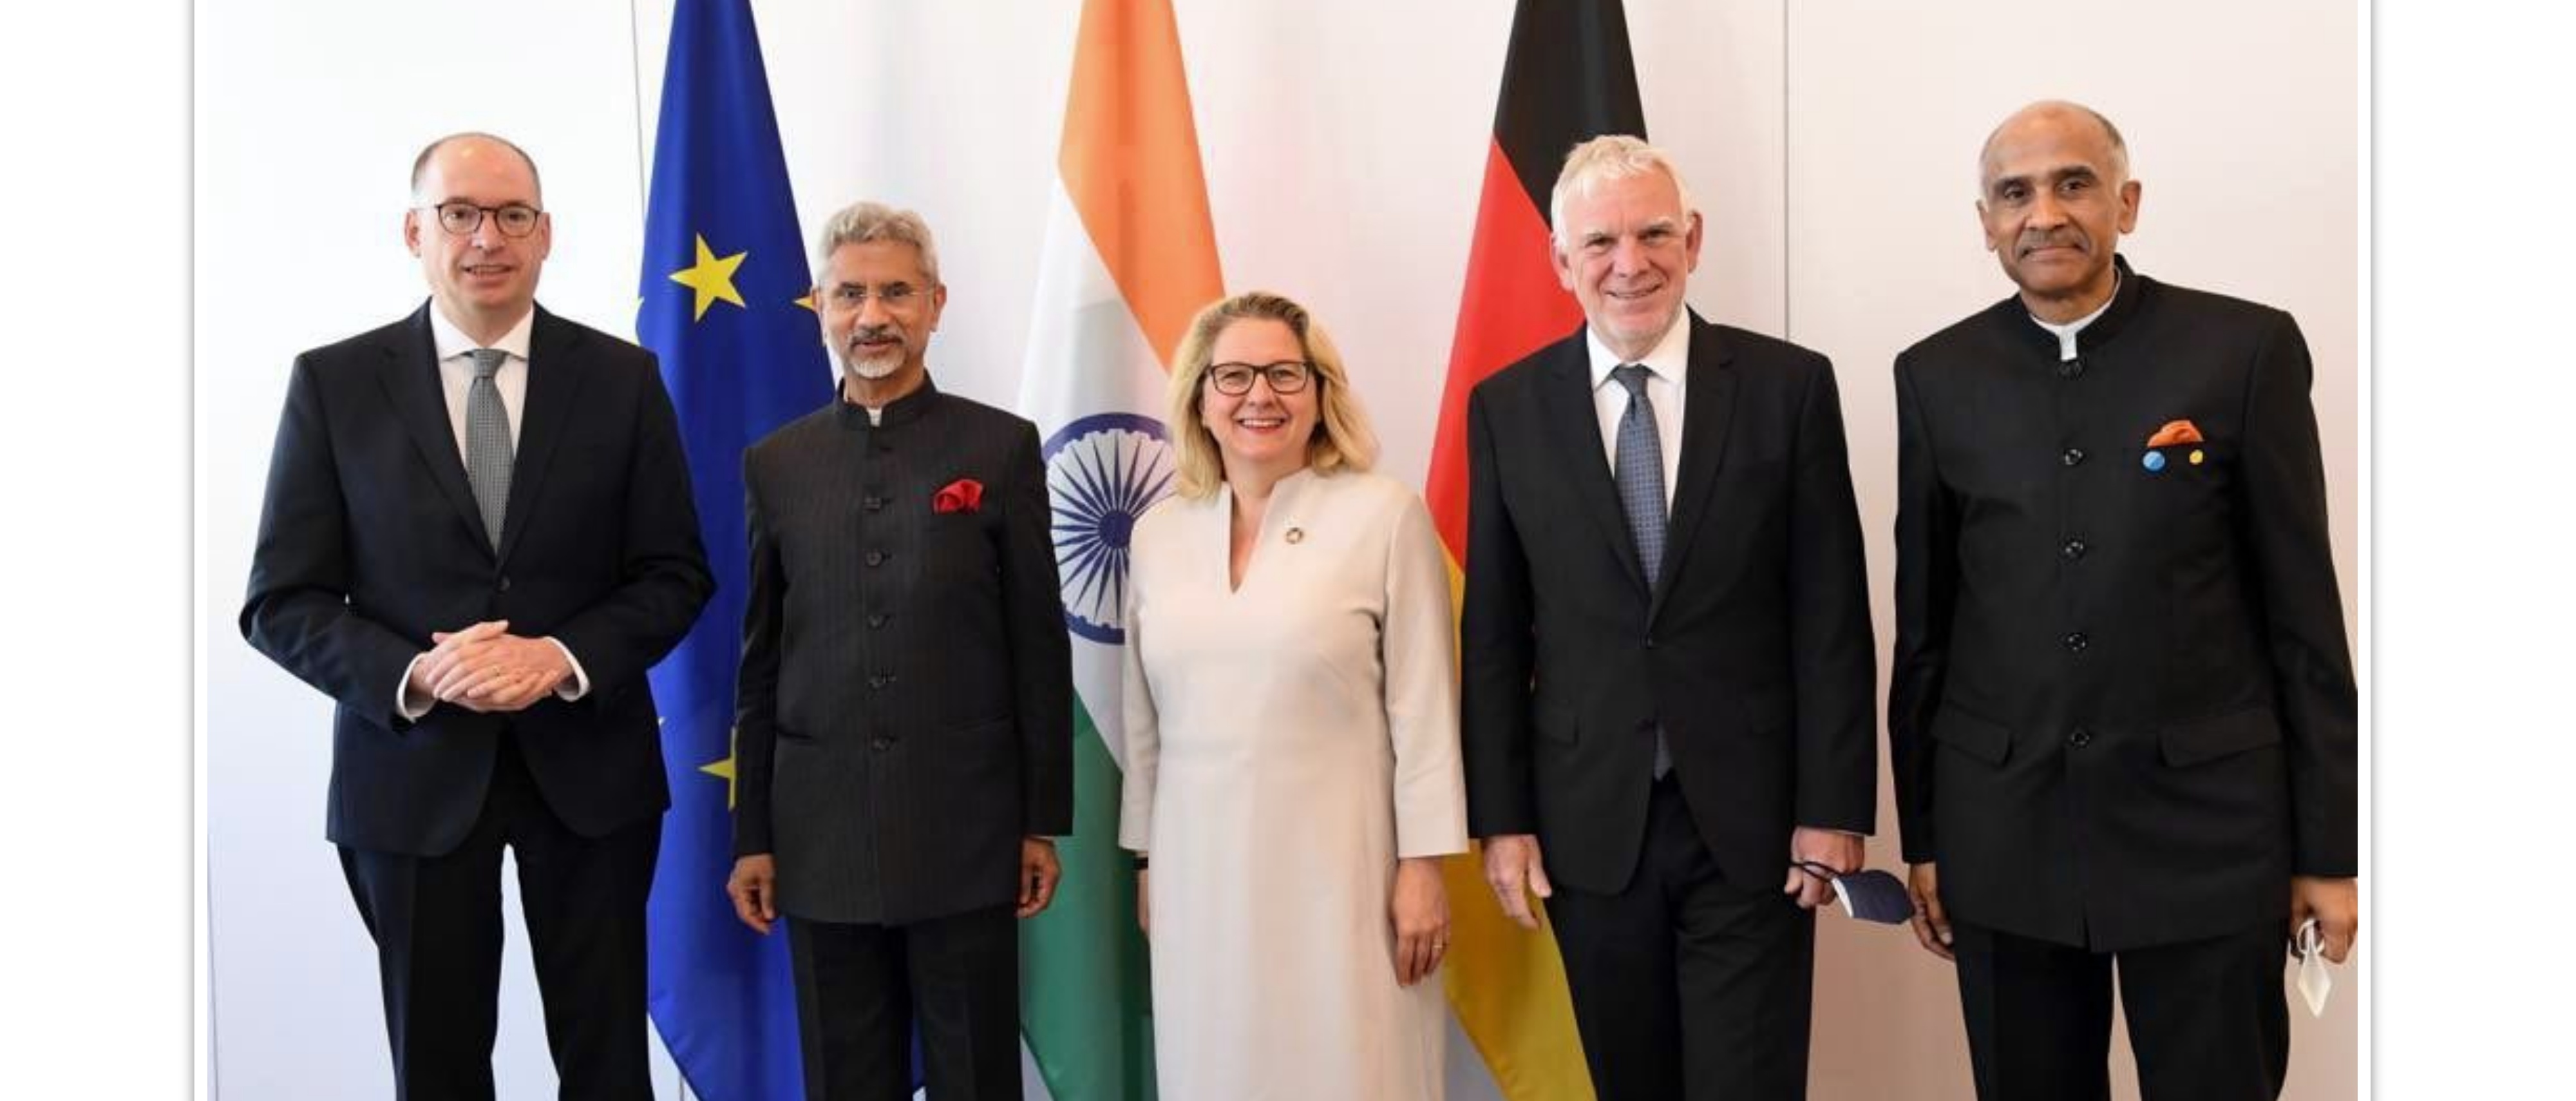  External Affairs Minister Dr. S. Jaishankar at the 6th India-Germany Inter-Governmental Consultations